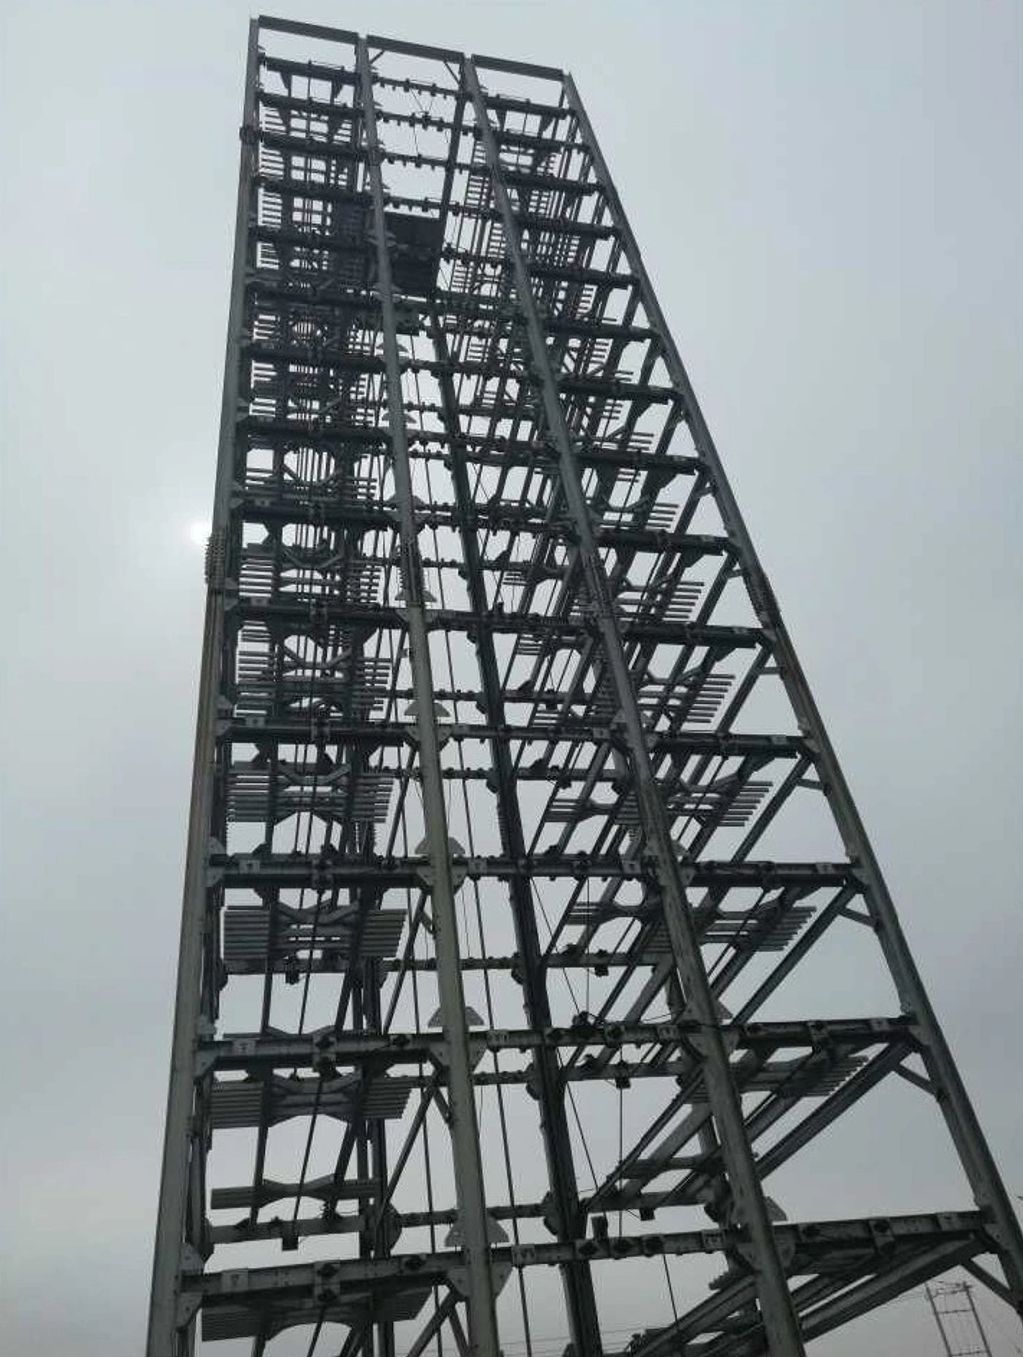 Tower Car Parking System

